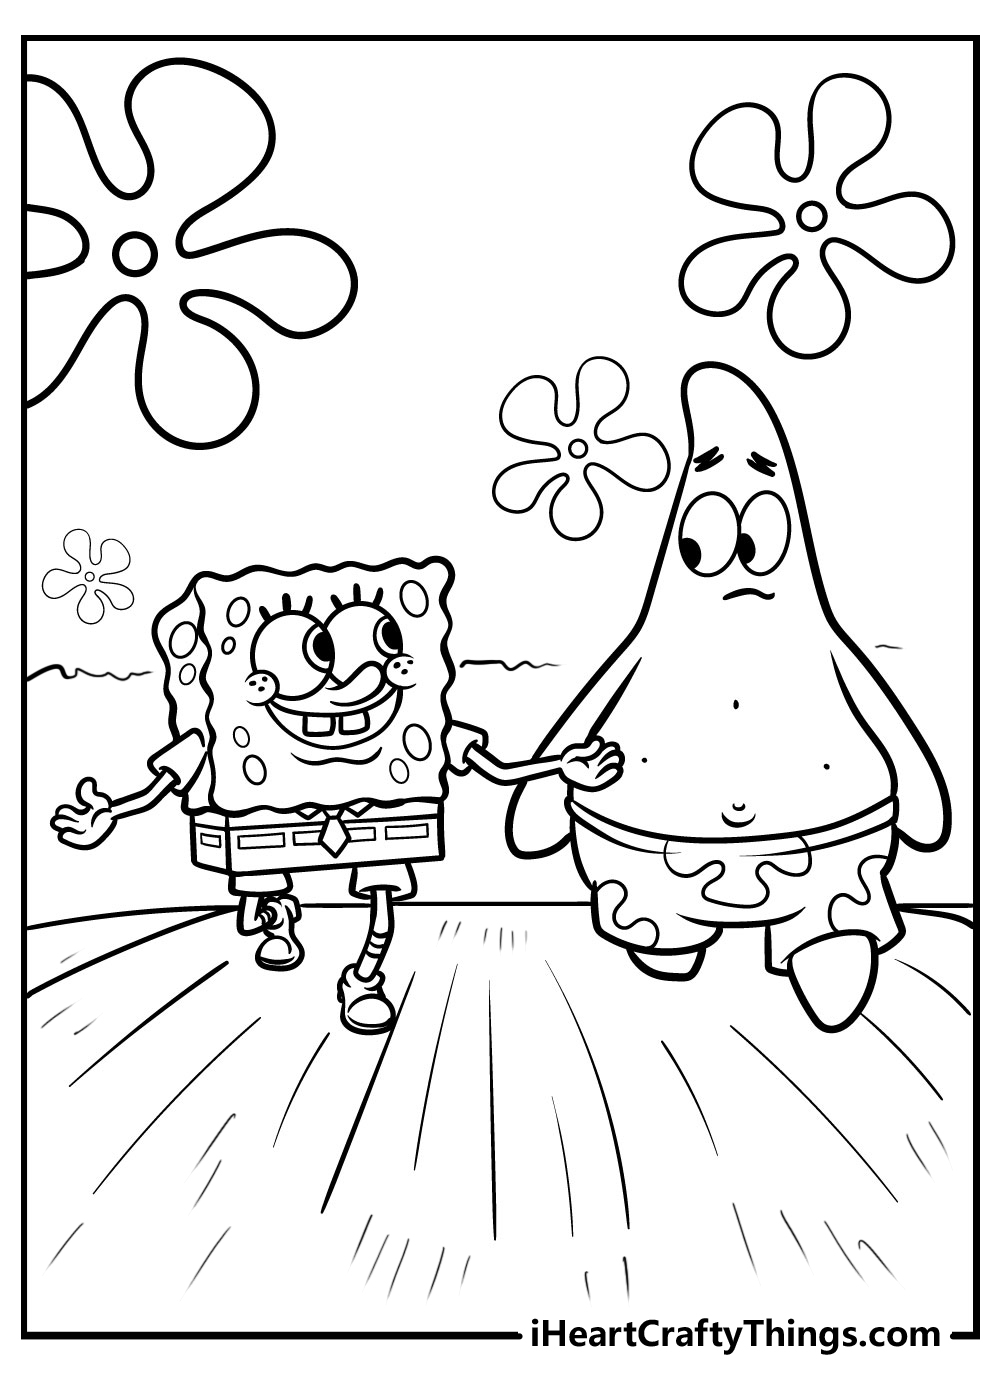 Spongebob Adult Coloring Pages Coloring Pages